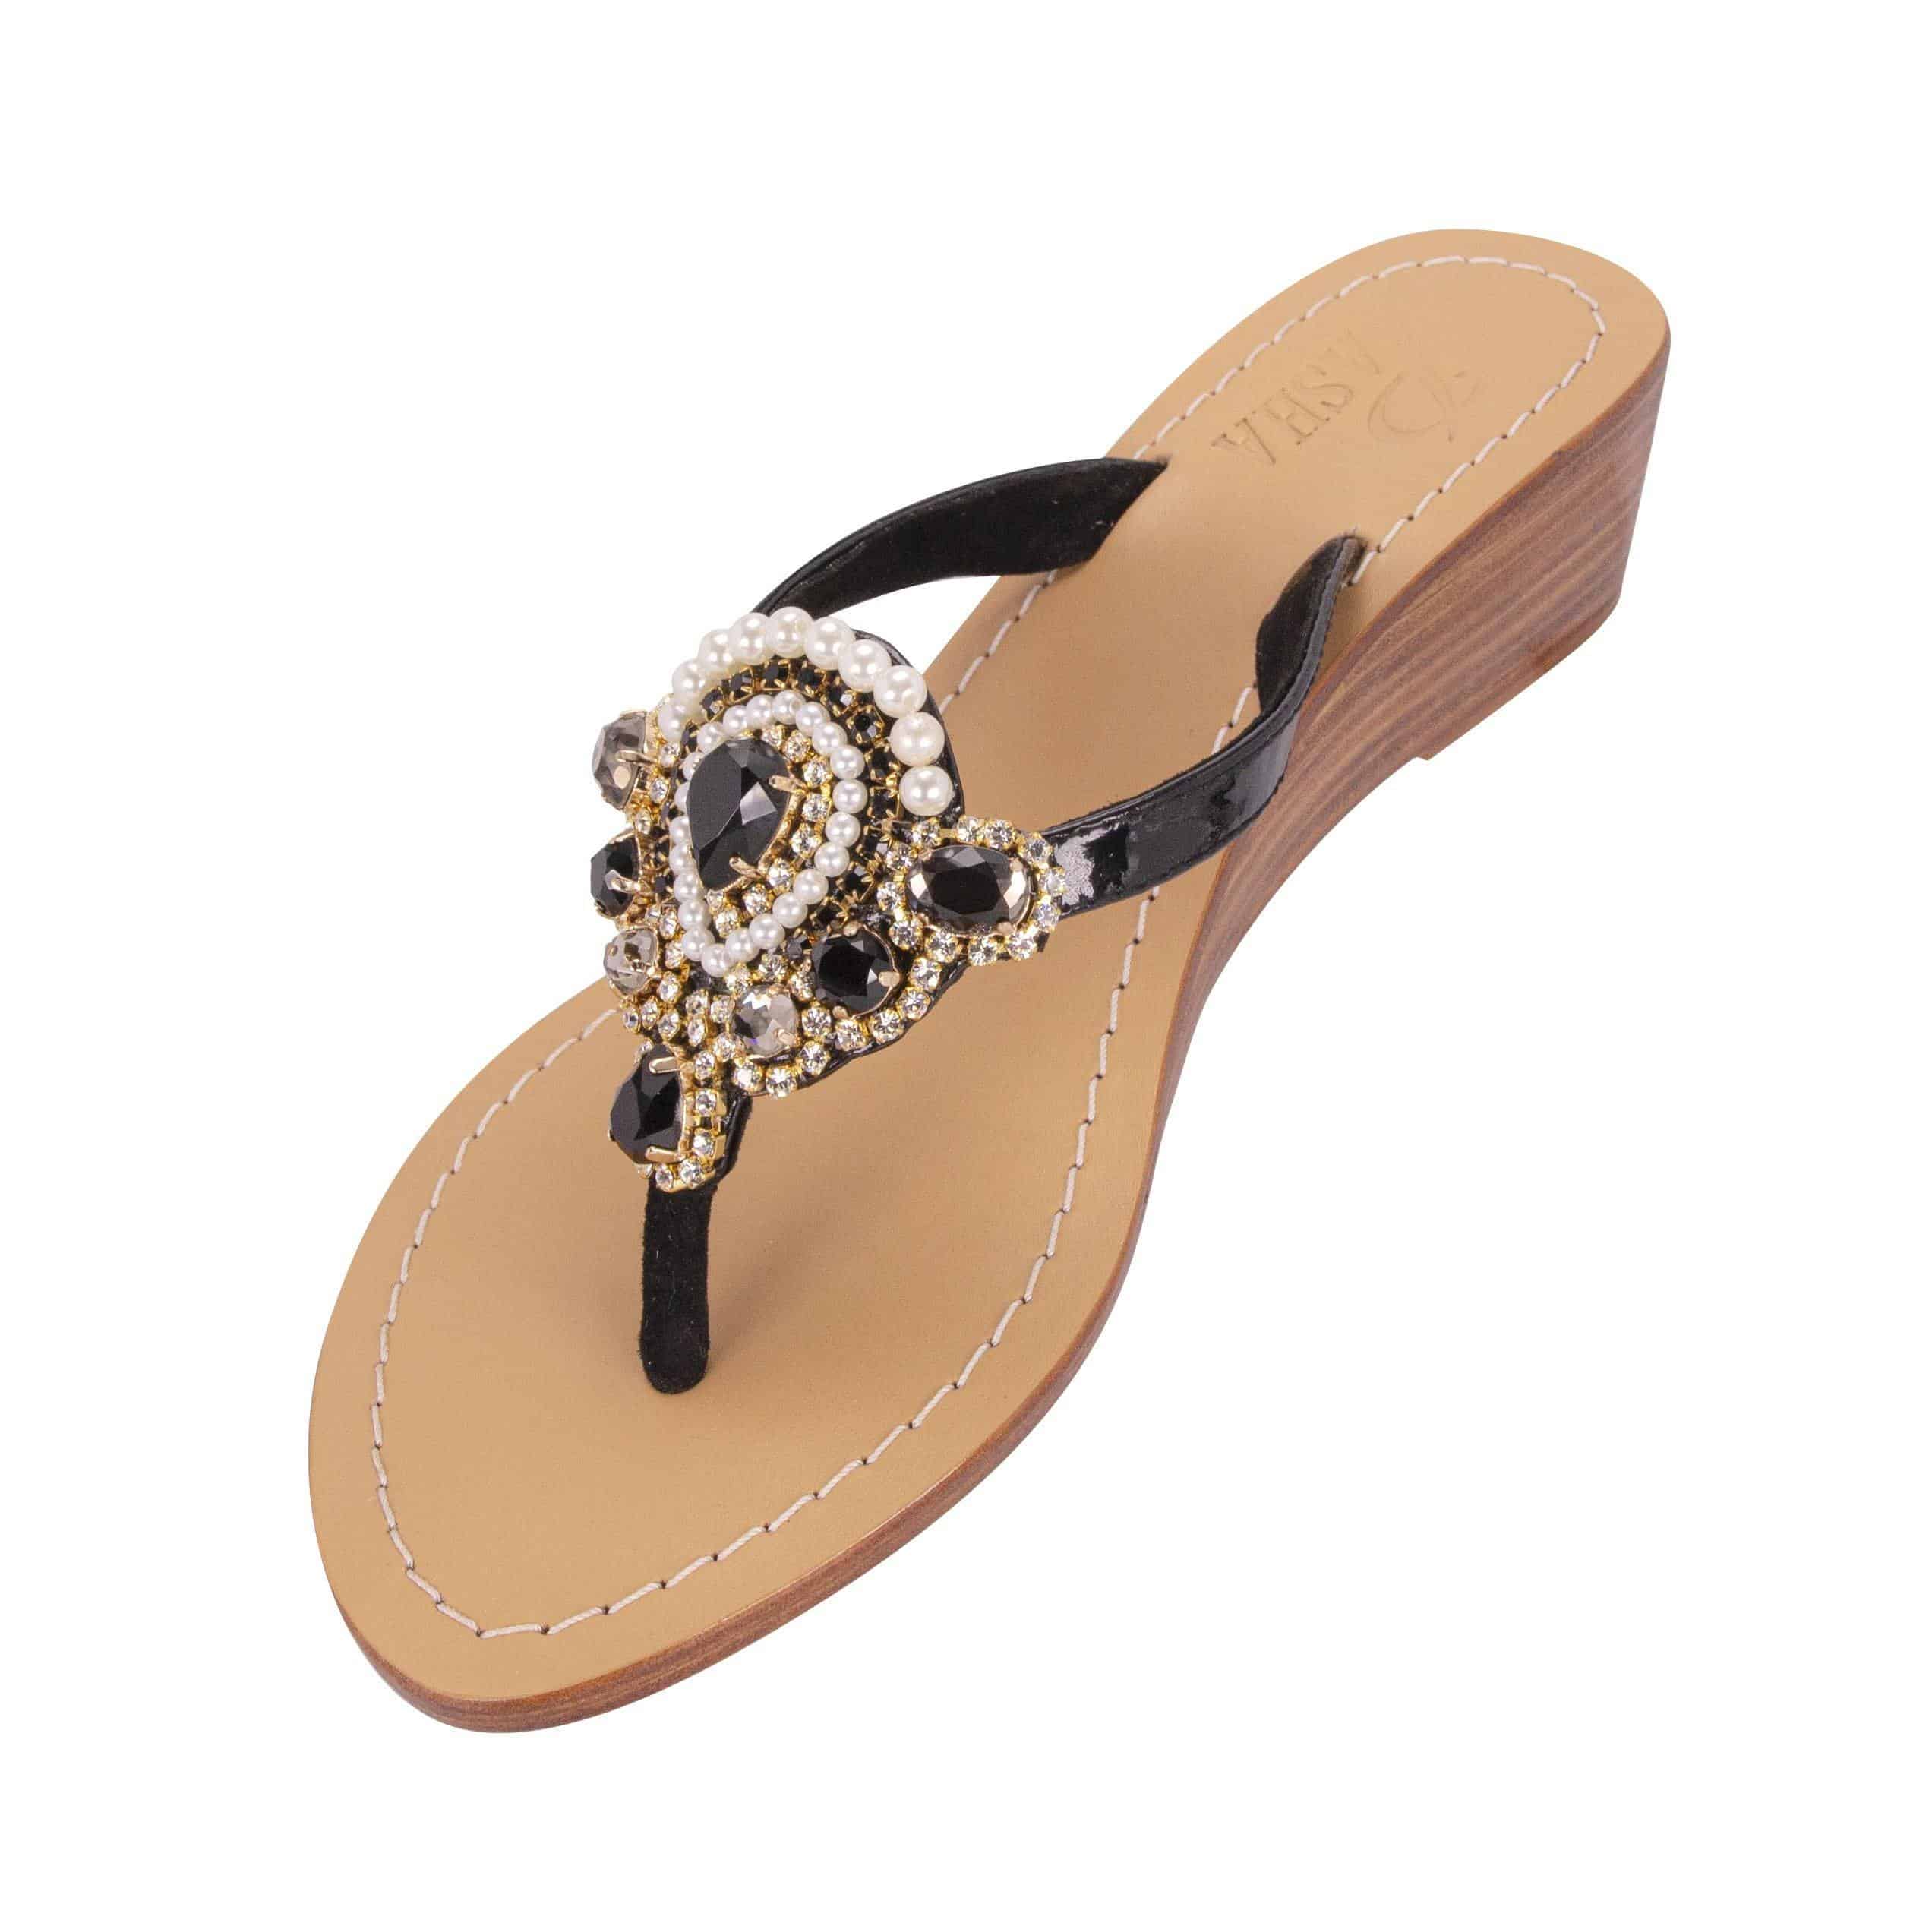 HAIZHU - Pasha Sandals - Jewelry for your feet - 